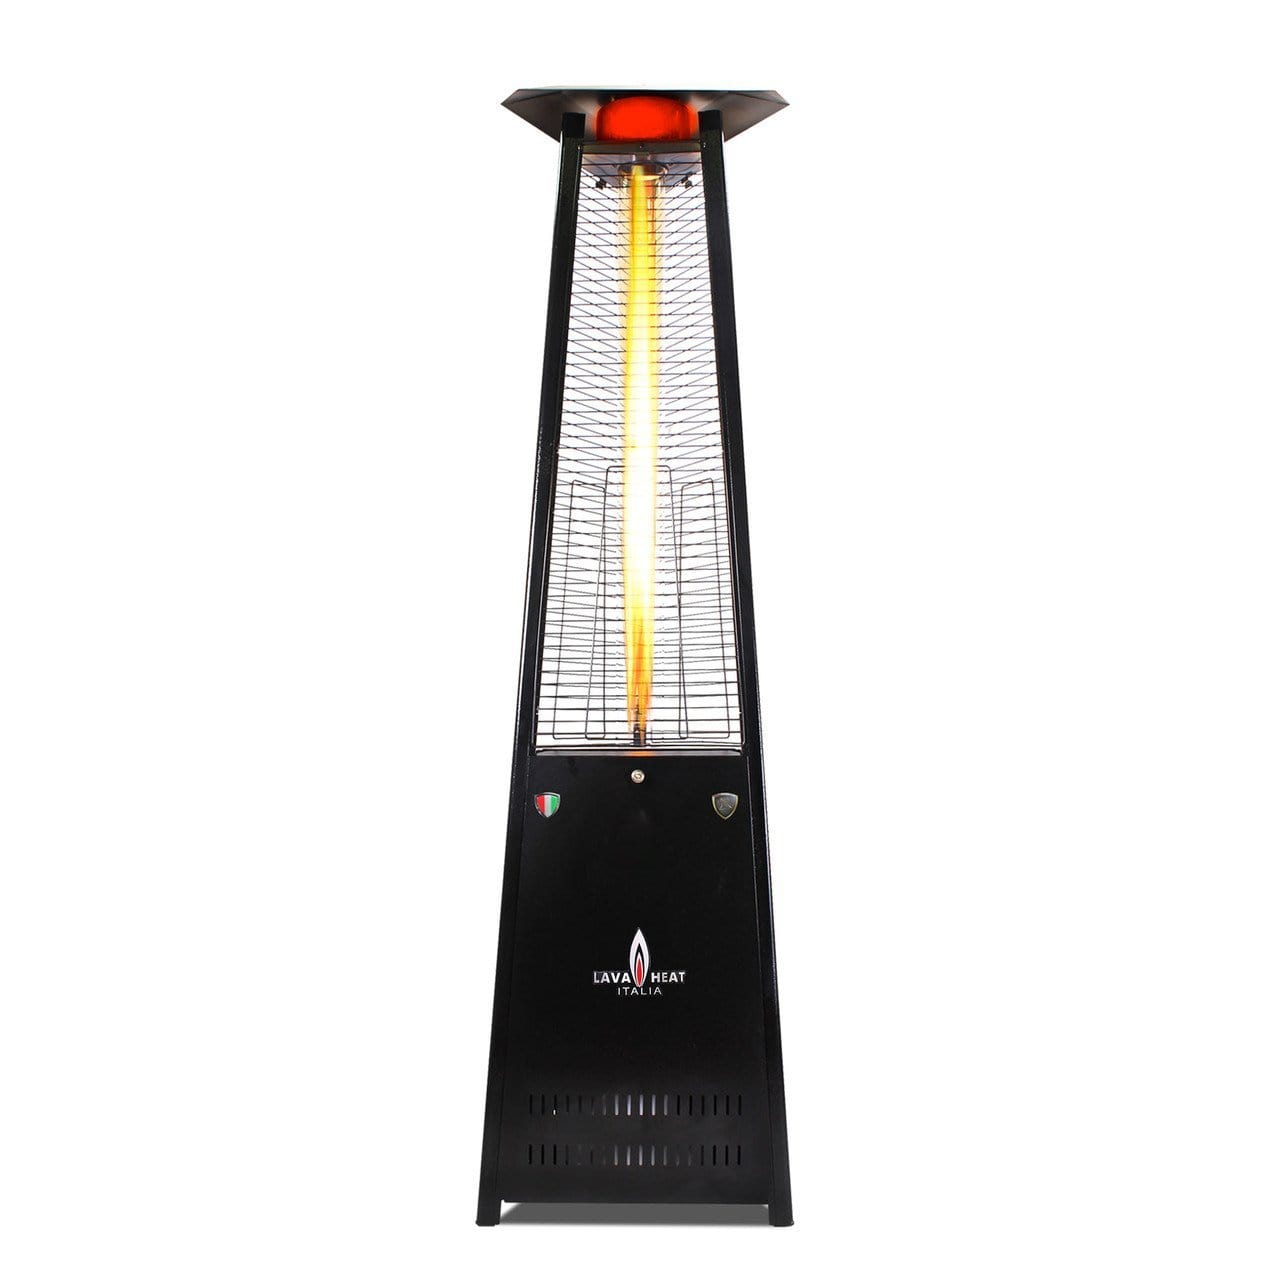 Lava Heat Italia Tower Patio Heater Propane / Hammered Black / Assembled The LAVAlite Triangle Flame Tower Heater,  92.5", 56,000 BTU, Electronic Ignition, Hammered Black, Bronze, Stainless Steel - Liquid Propane OR Natural Gas